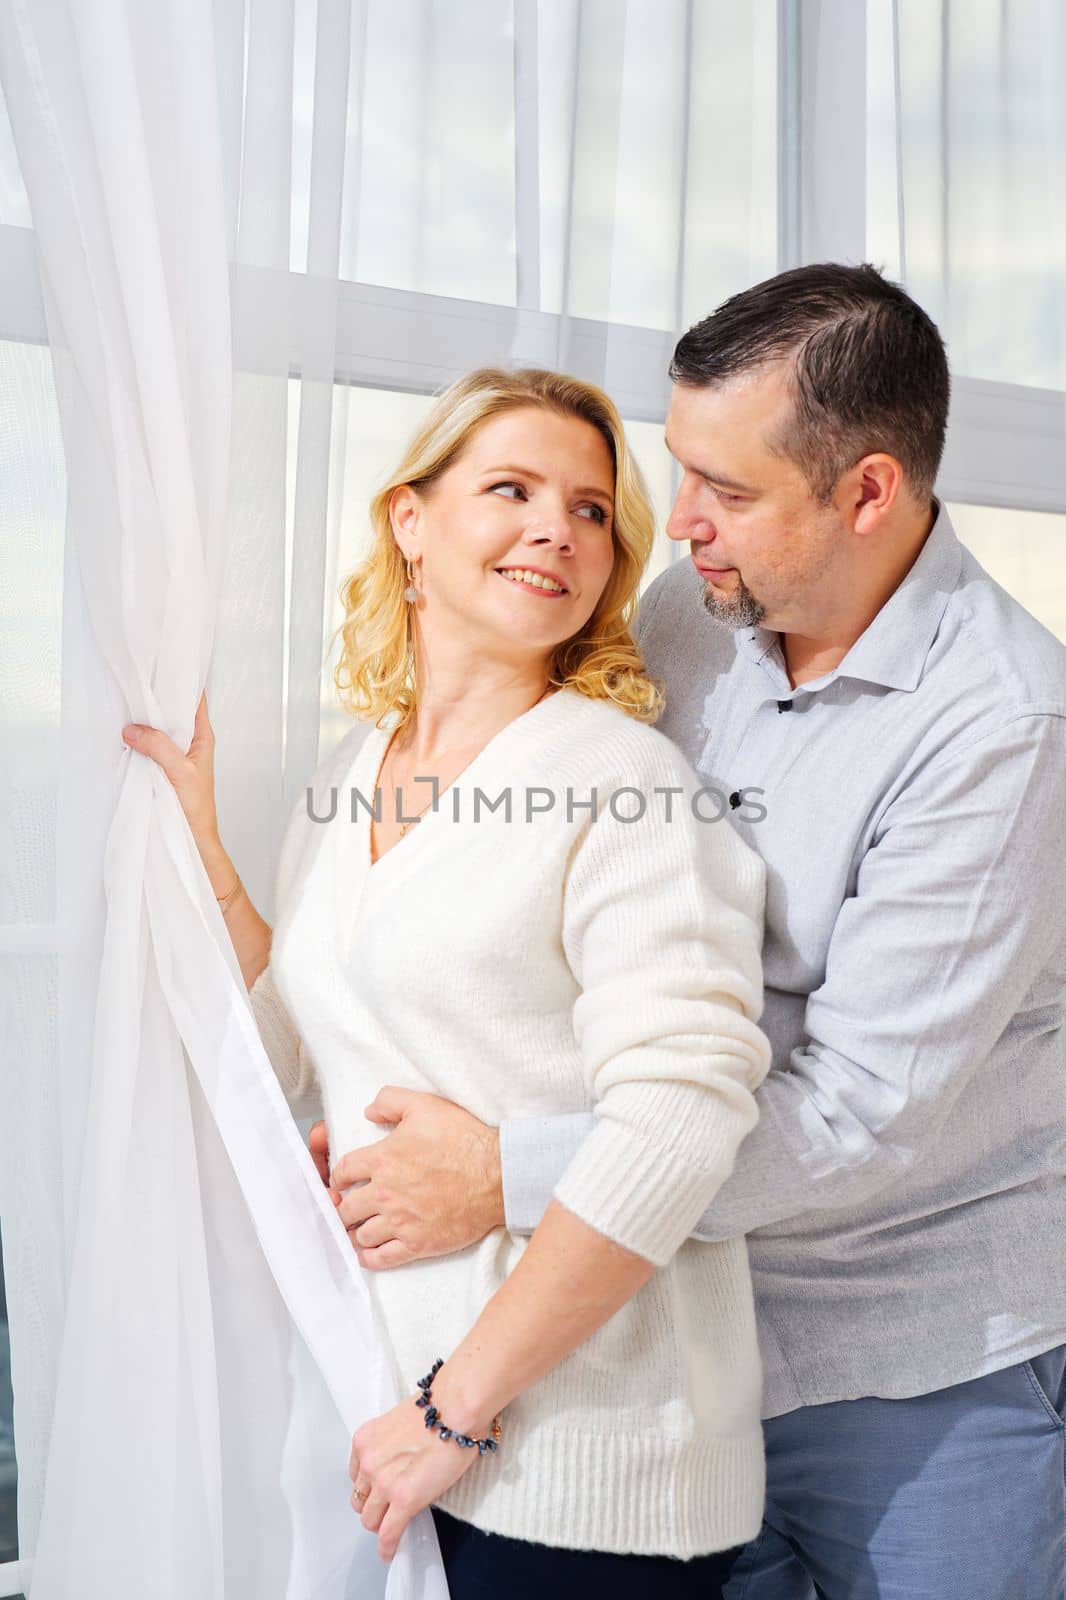 Middle-aged couple embracing in front of window. Middle aged blond woman and man portrait by PhotoTime